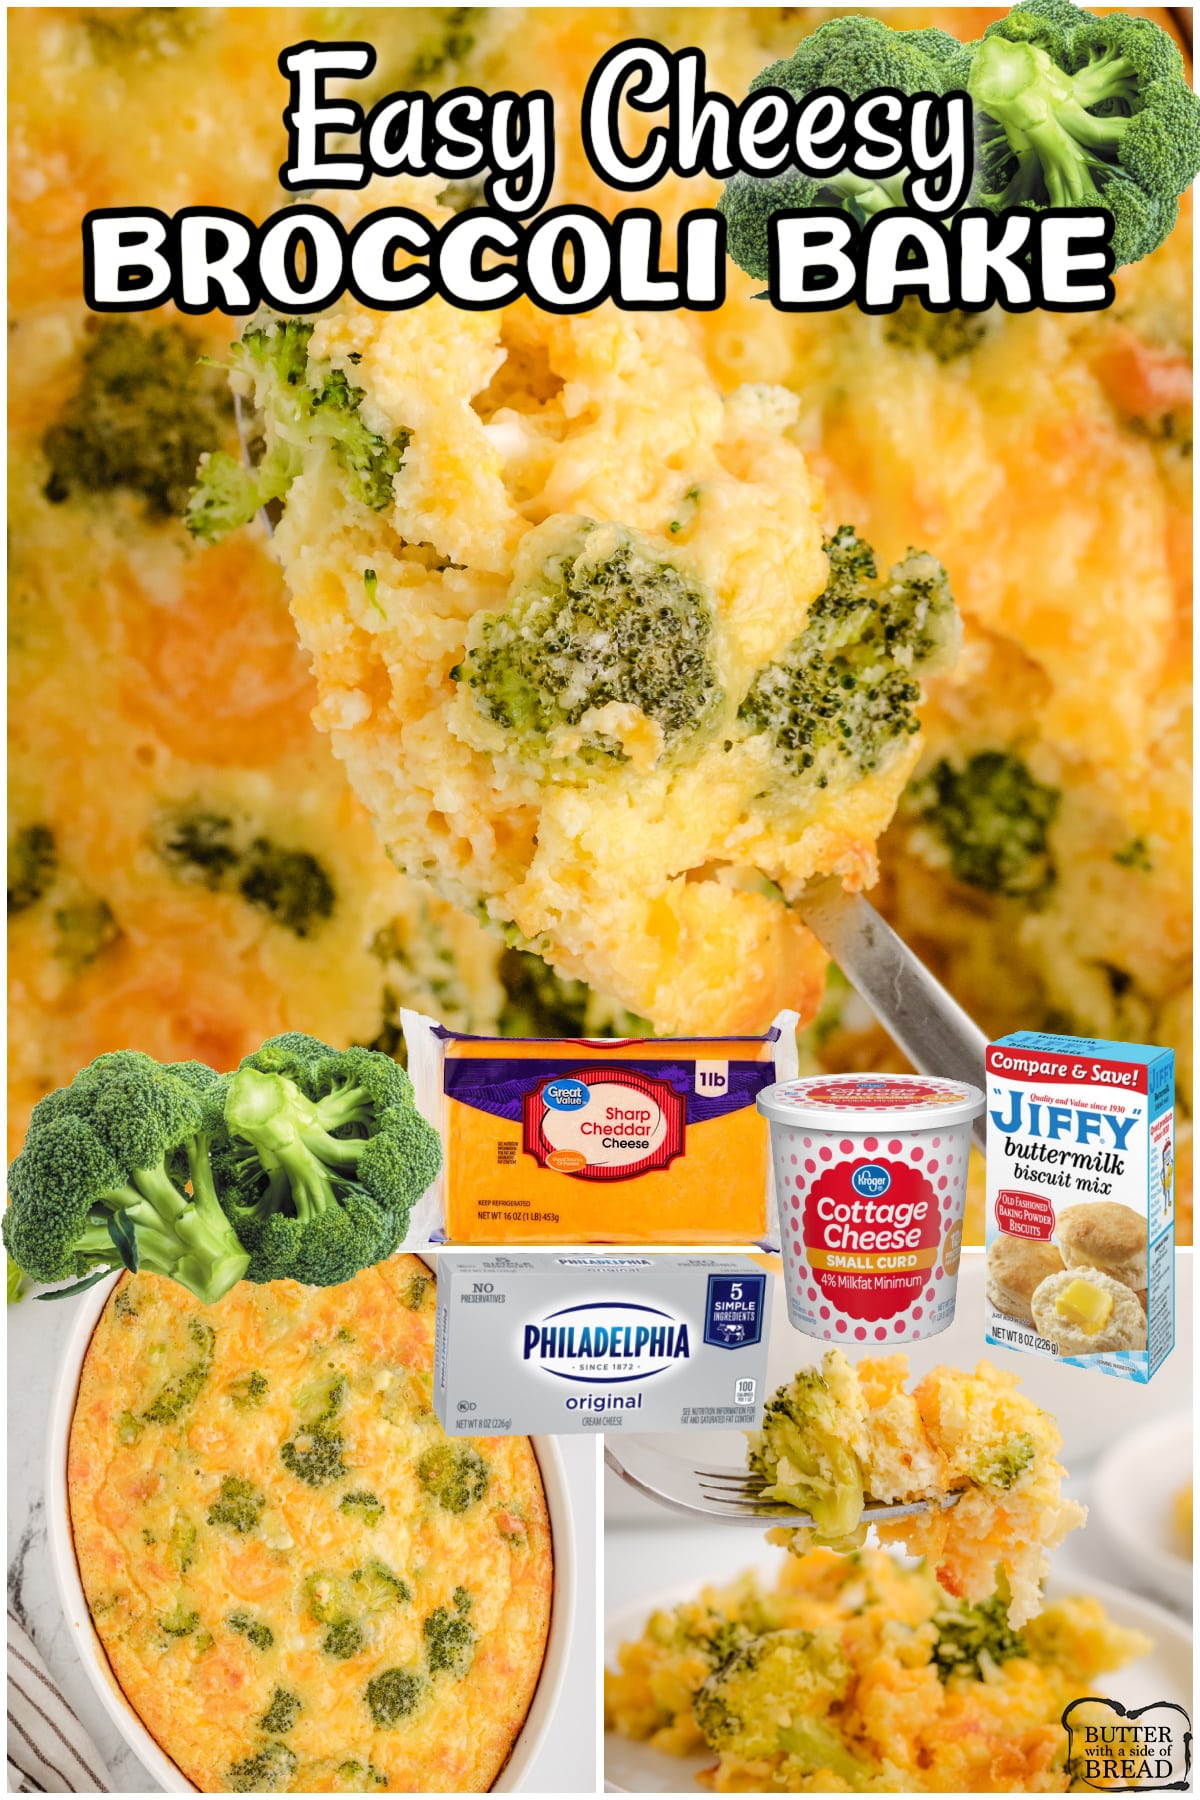 Broccoli Cheddar Casserole packed with 3 different cheeses, eggs, biscuit mix and broccoli florets for a delicious, hearty side dish! Classic broccoli bake Grandma used to make!